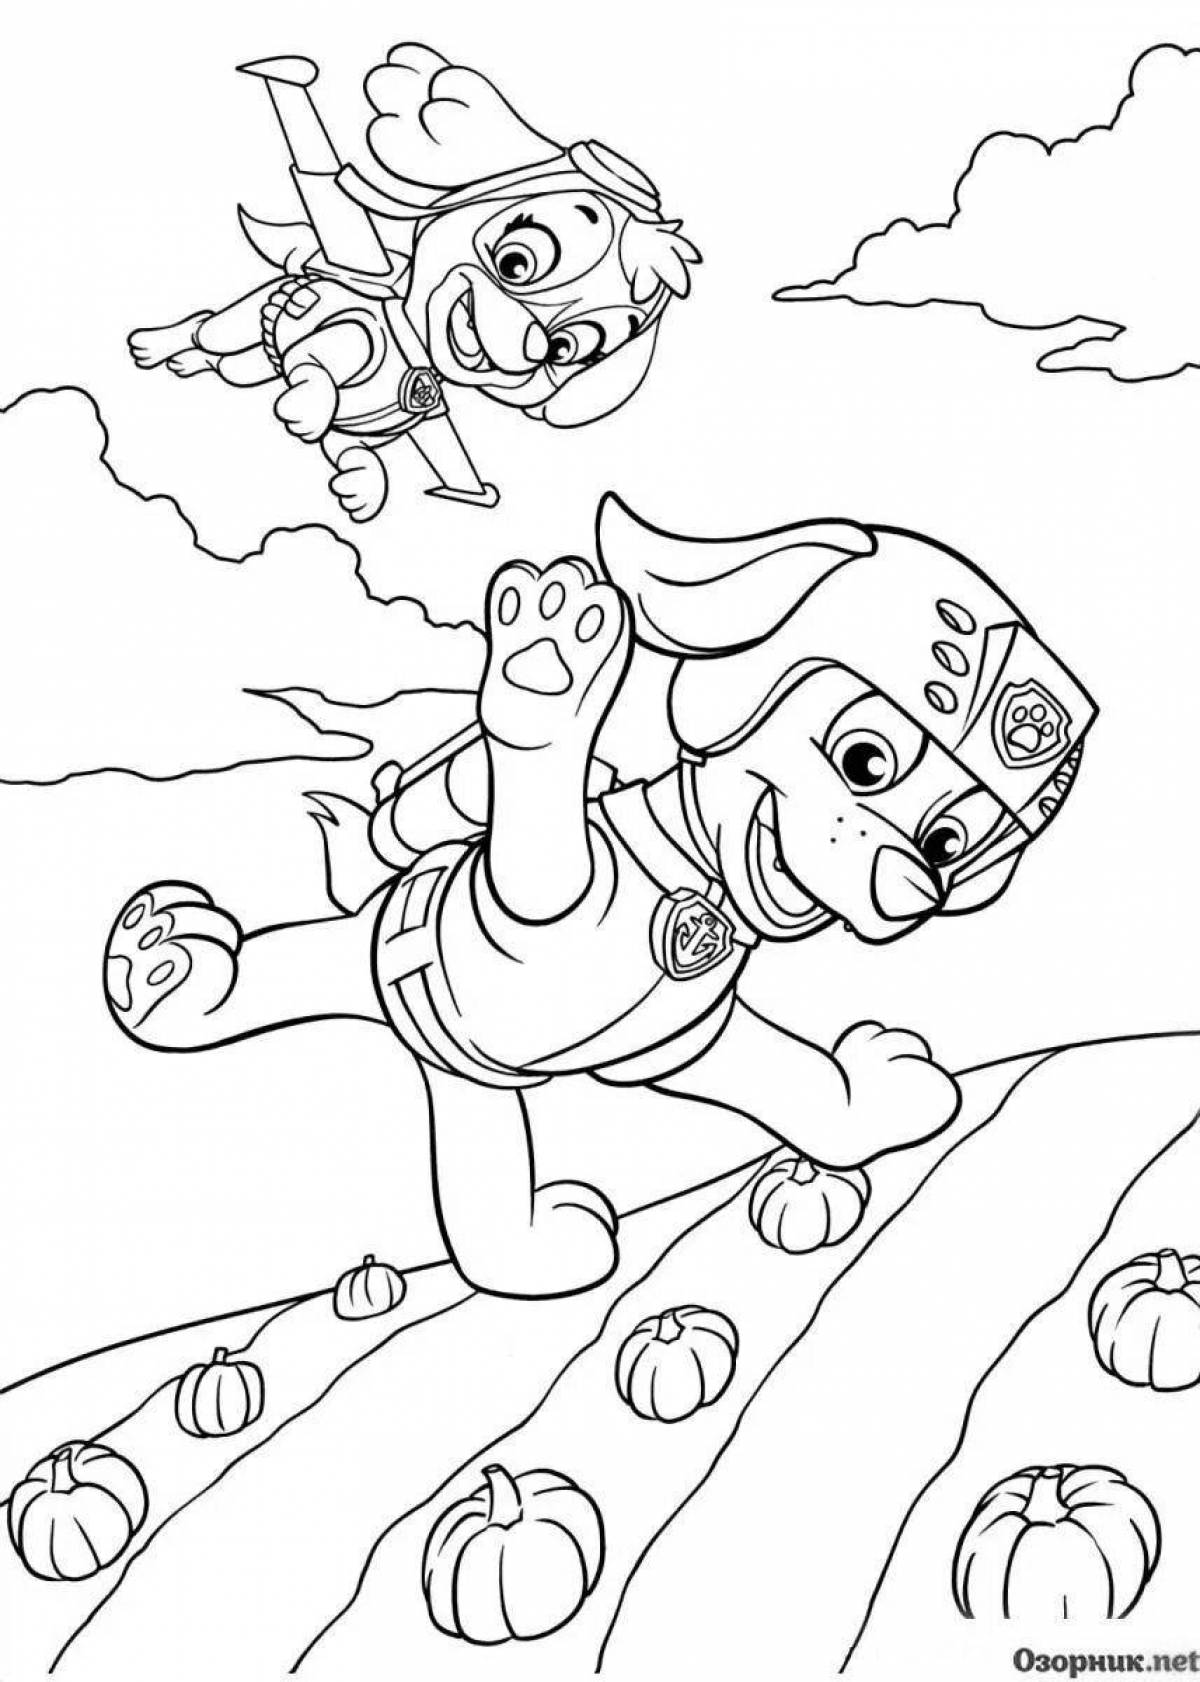 Glorious sky coloring pages for kids